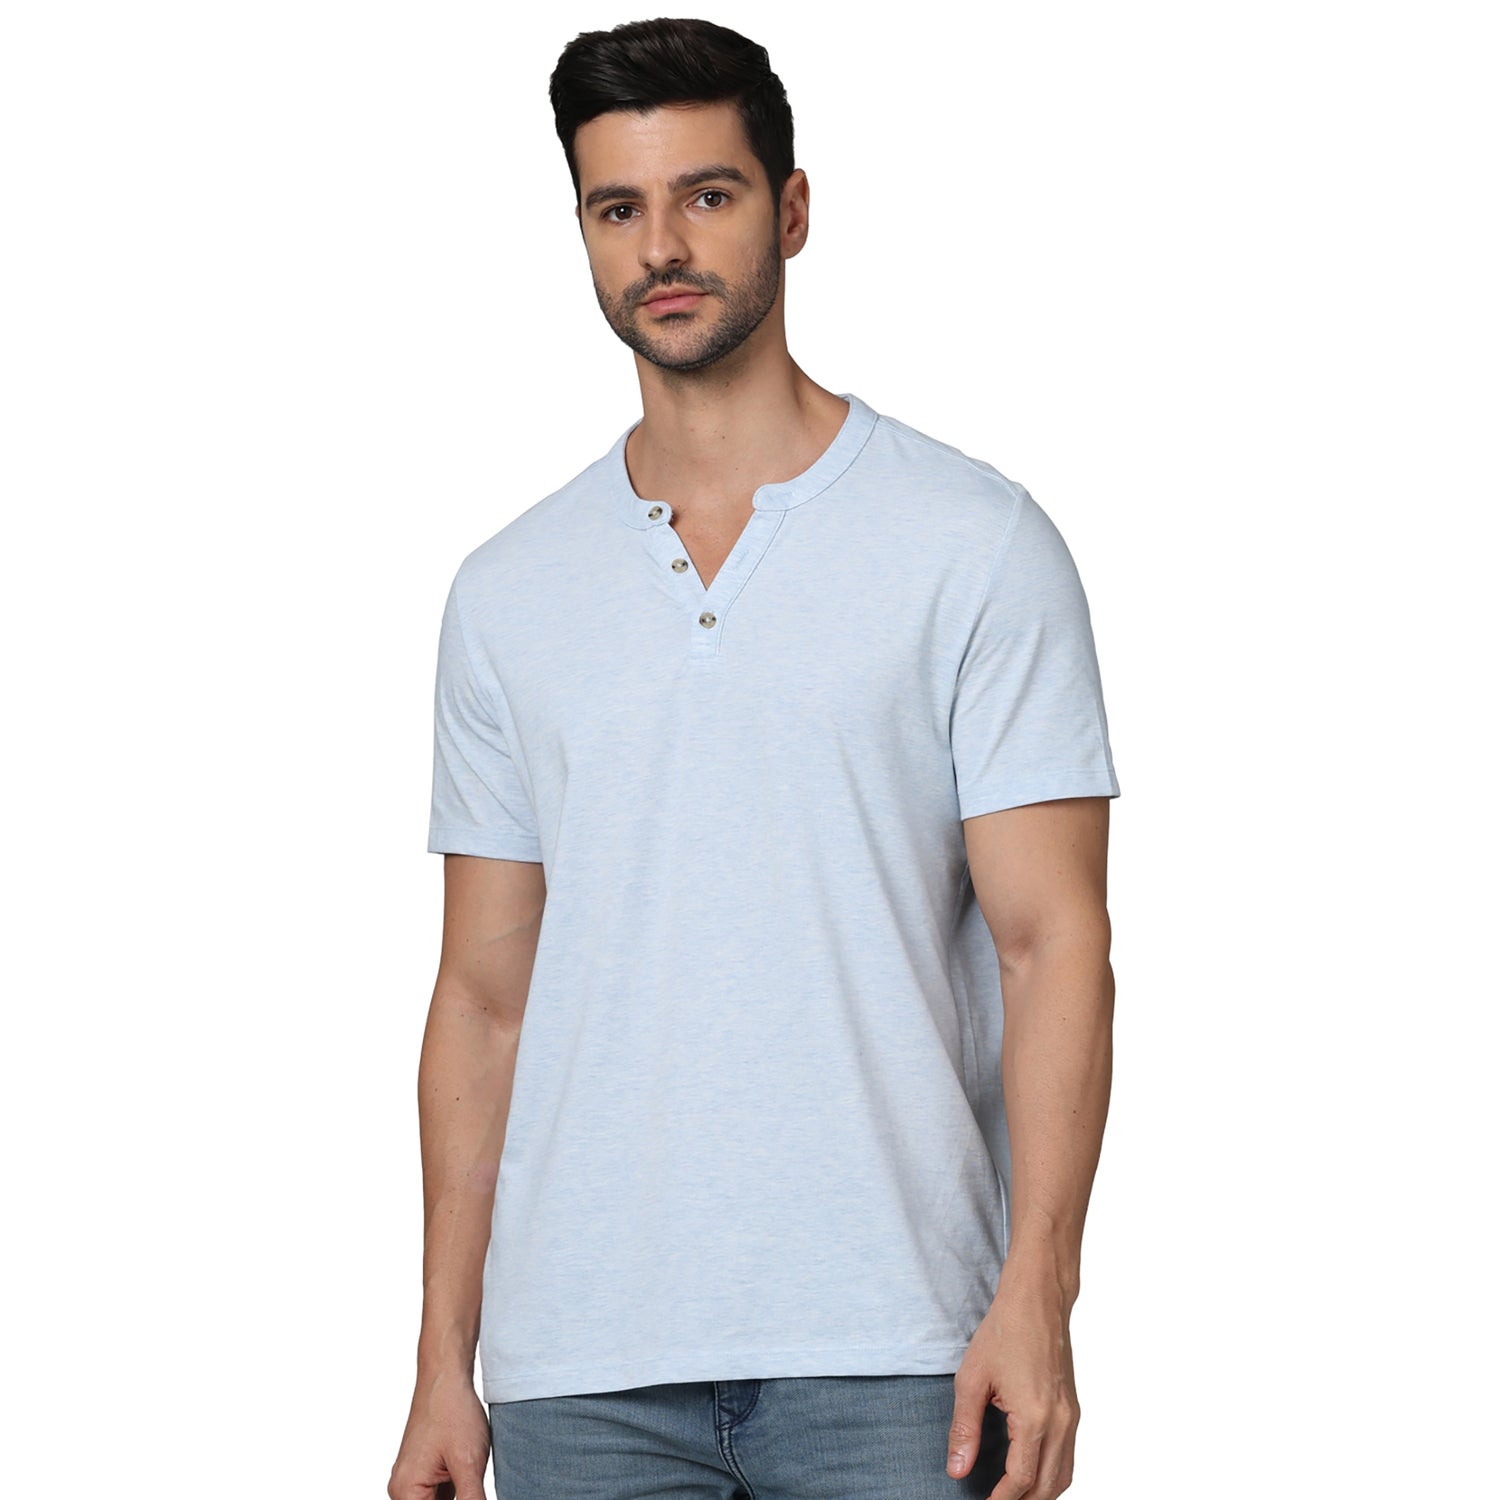 Men's Blue Henley Neck Solid Regular Fit Cotton Casual Tshirts (CEGETI2)